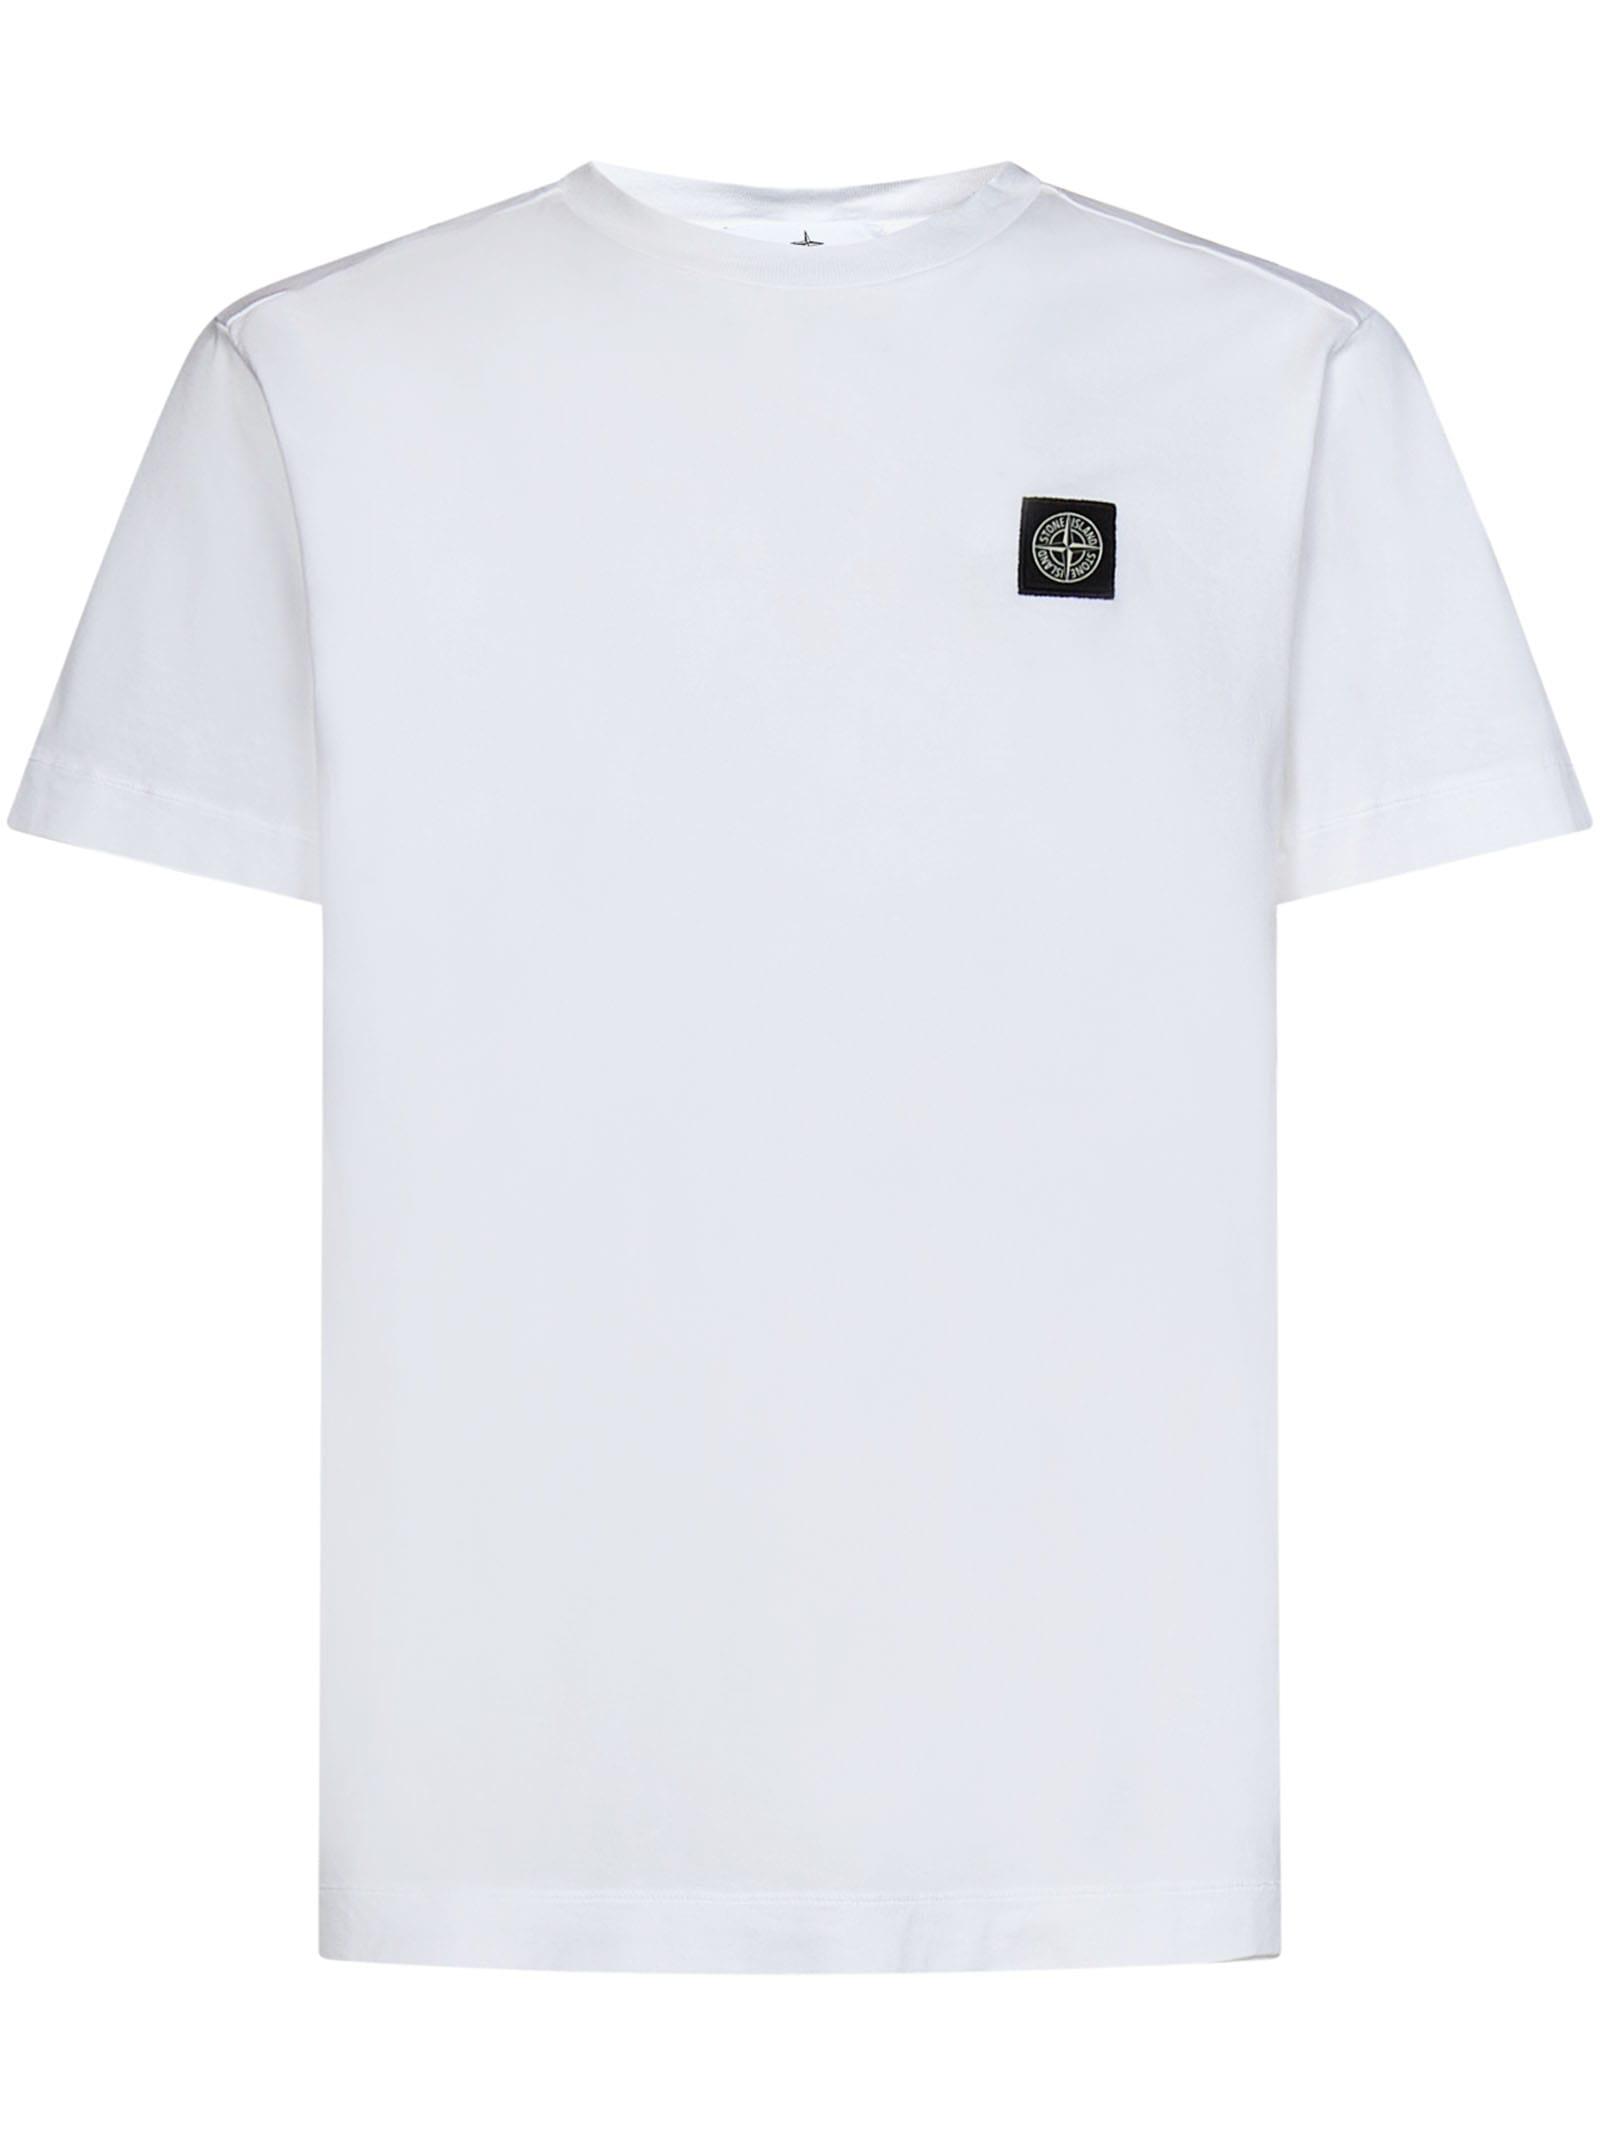 Stone Island T-shirt in White for Men | Lyst